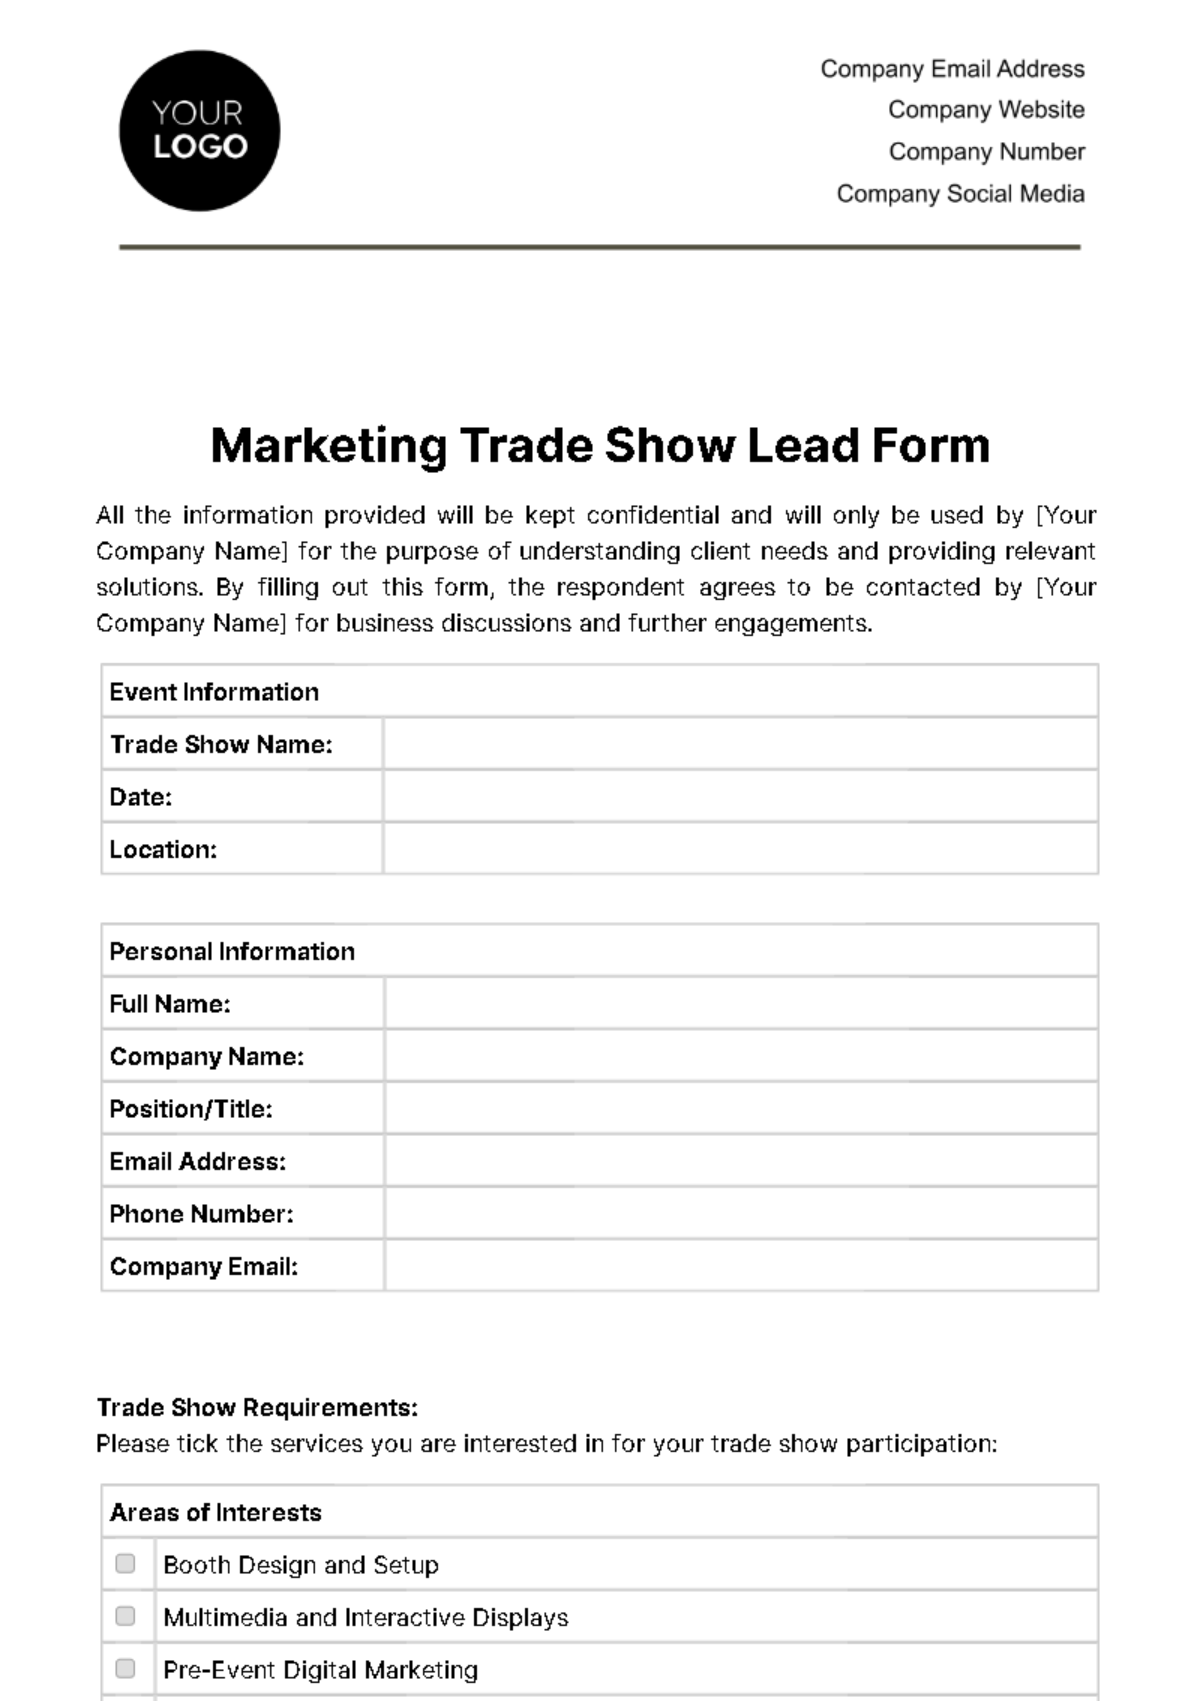 Free Marketing Trade Show Lead Form Template